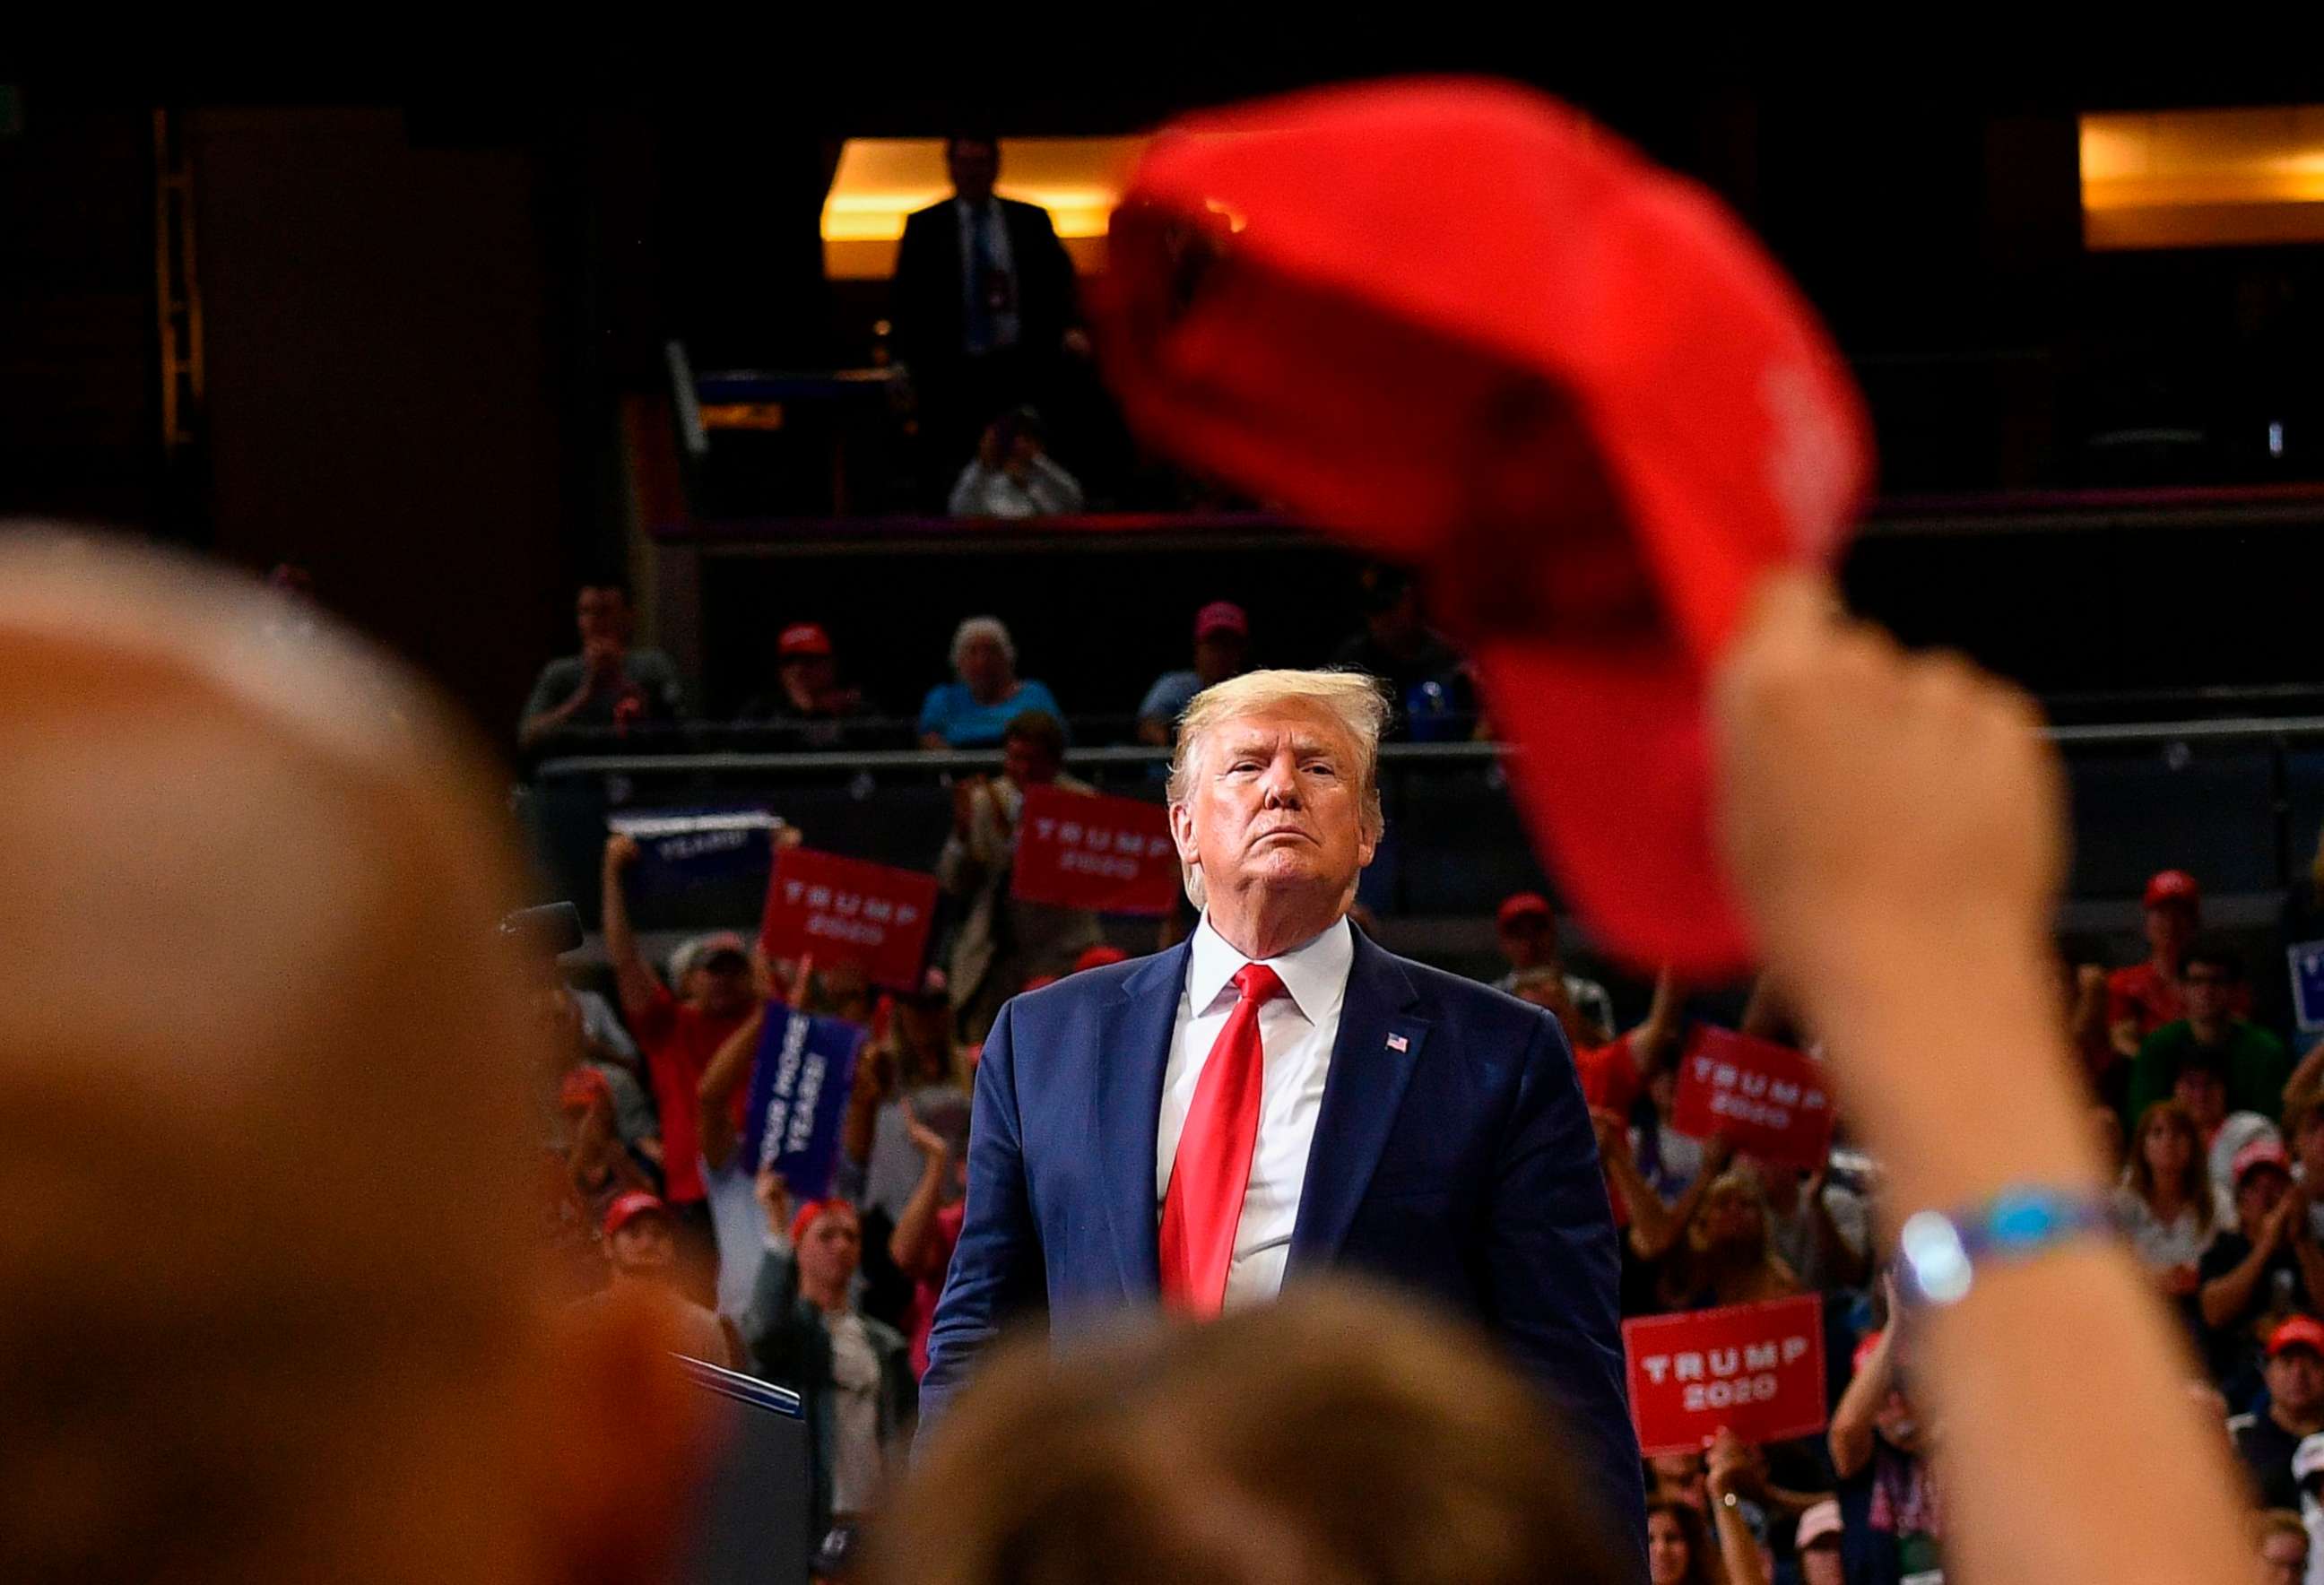 PHOTO: President Donald Trump speaks during a rally at the Amway Center in Orlando, Fla., to officially launch his 2020 campaign on June 18, 2019.